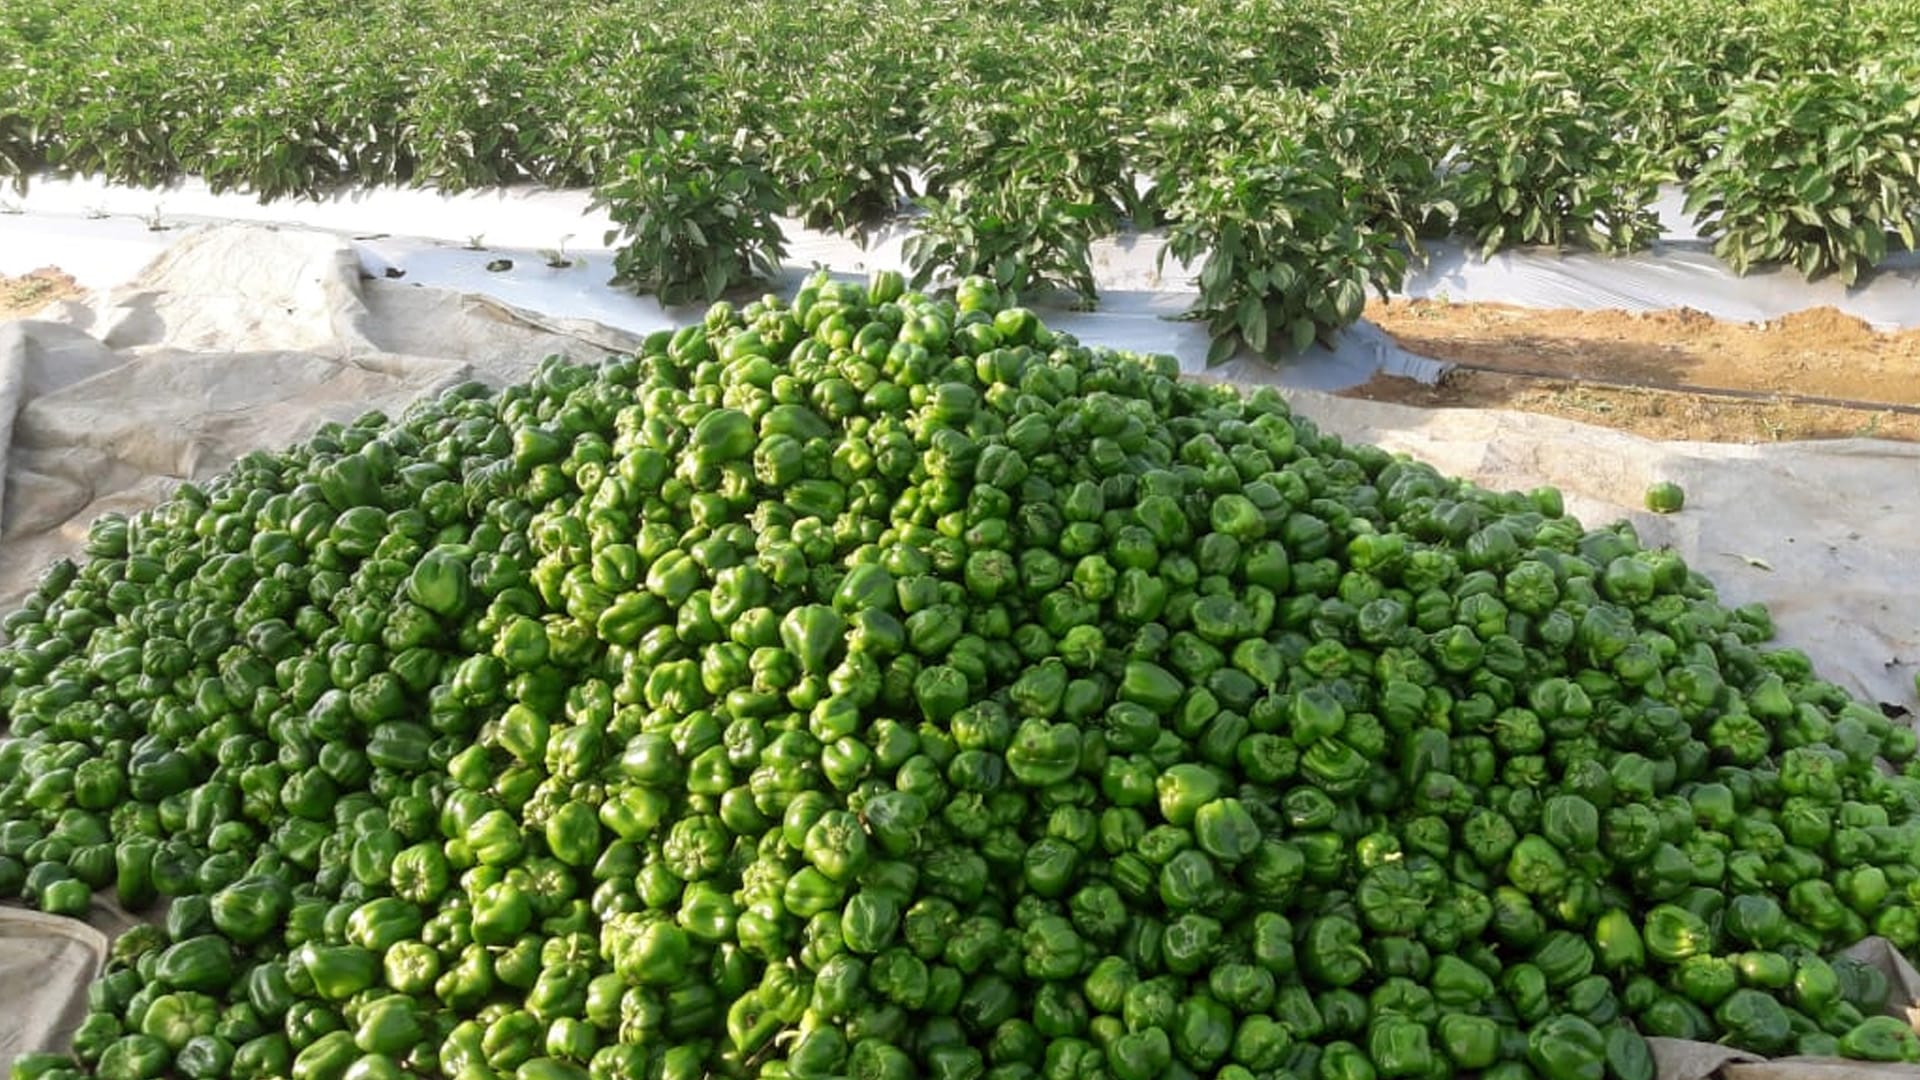 KissanPro signs pact with Barakat Vegetable & Fruit to help farmers sell produces in Middle East